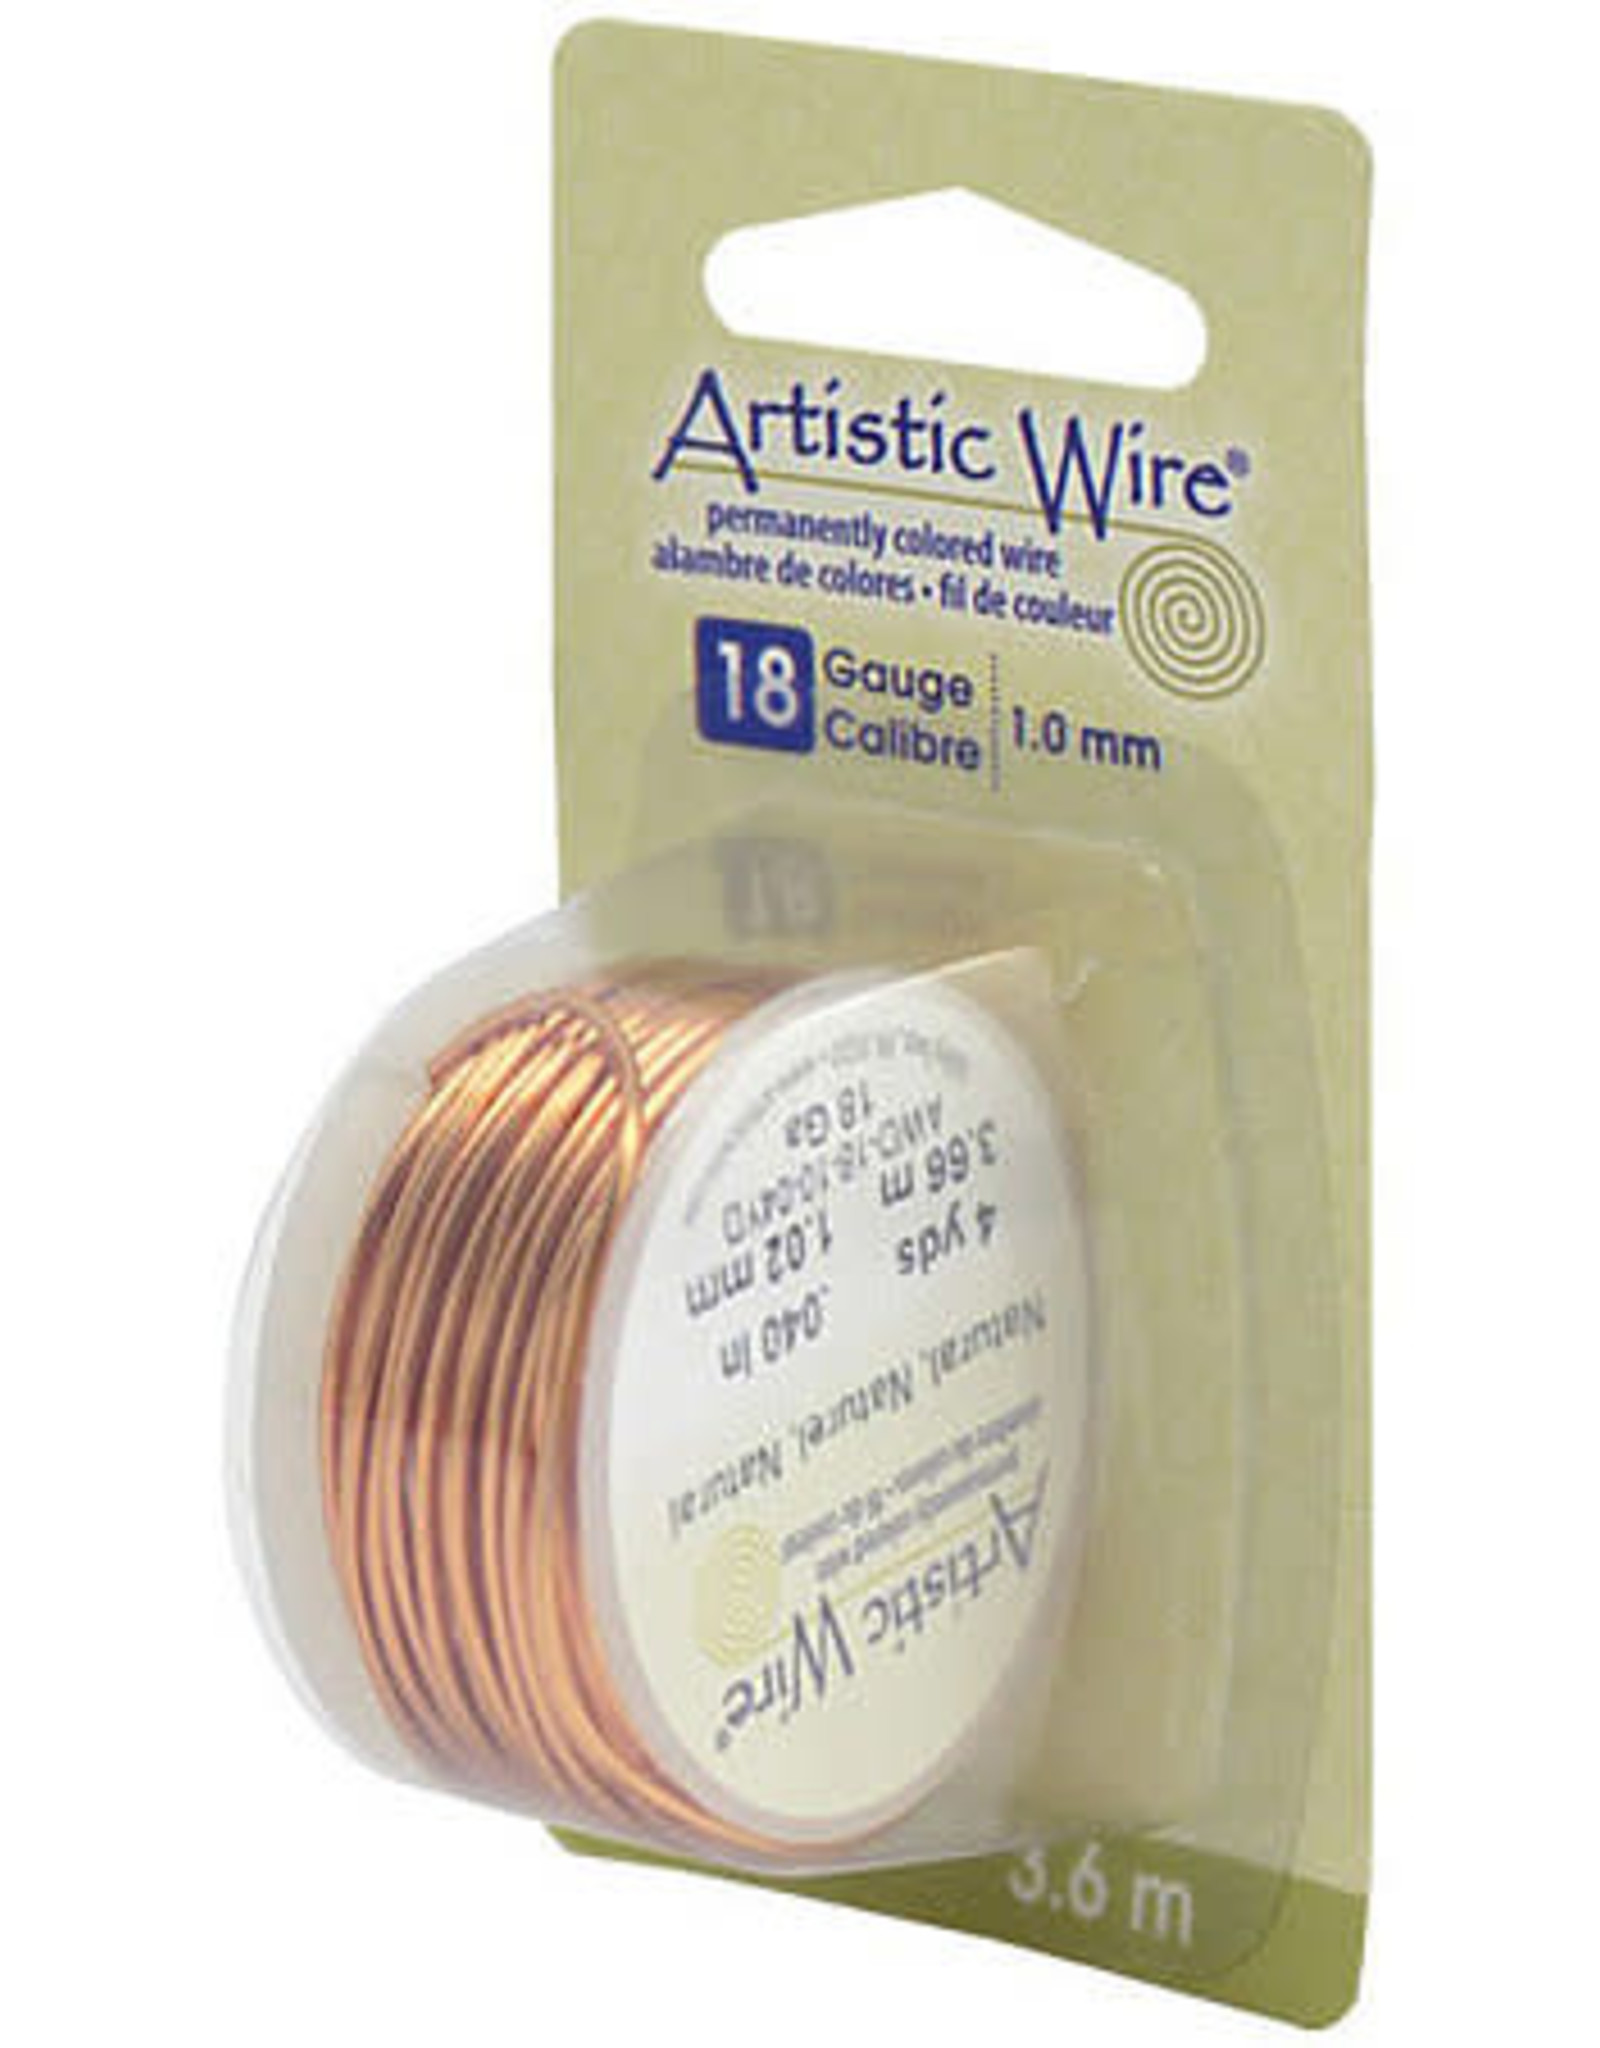 Artistic Wire Colored Copper Craft Wire, 14 Gauge (1.6mm) 10 ft., Tinned Copper